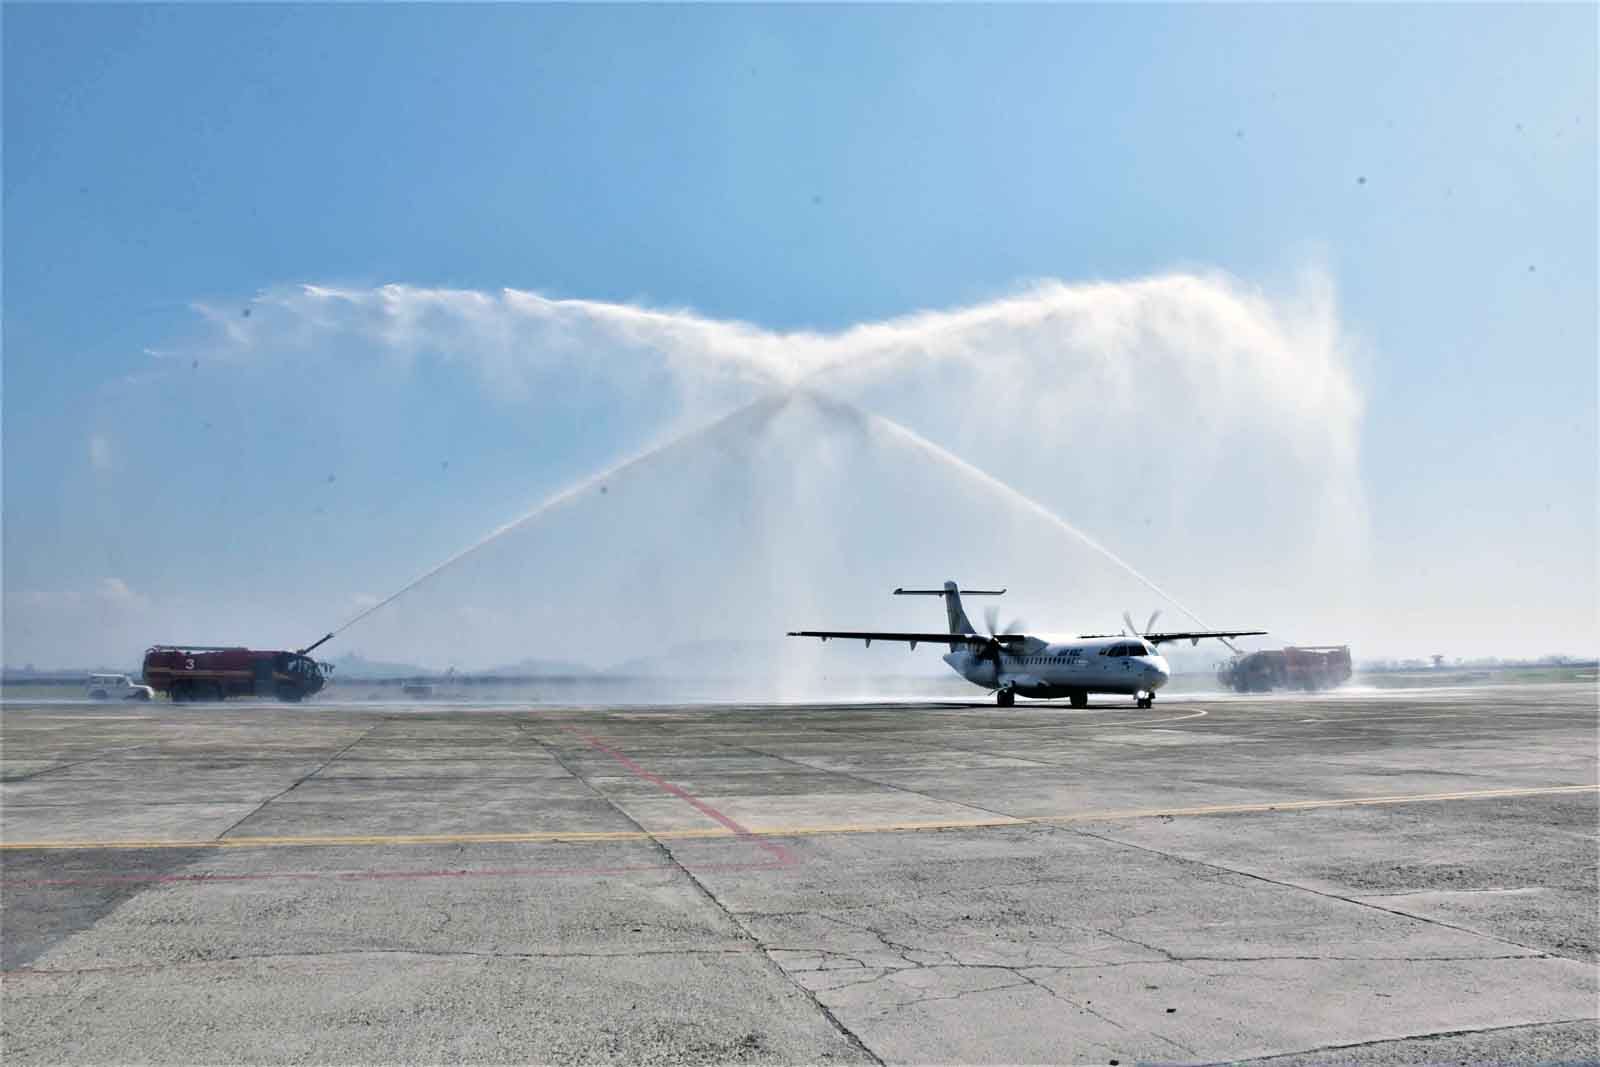 Air services from Imphal to Mandalay launched